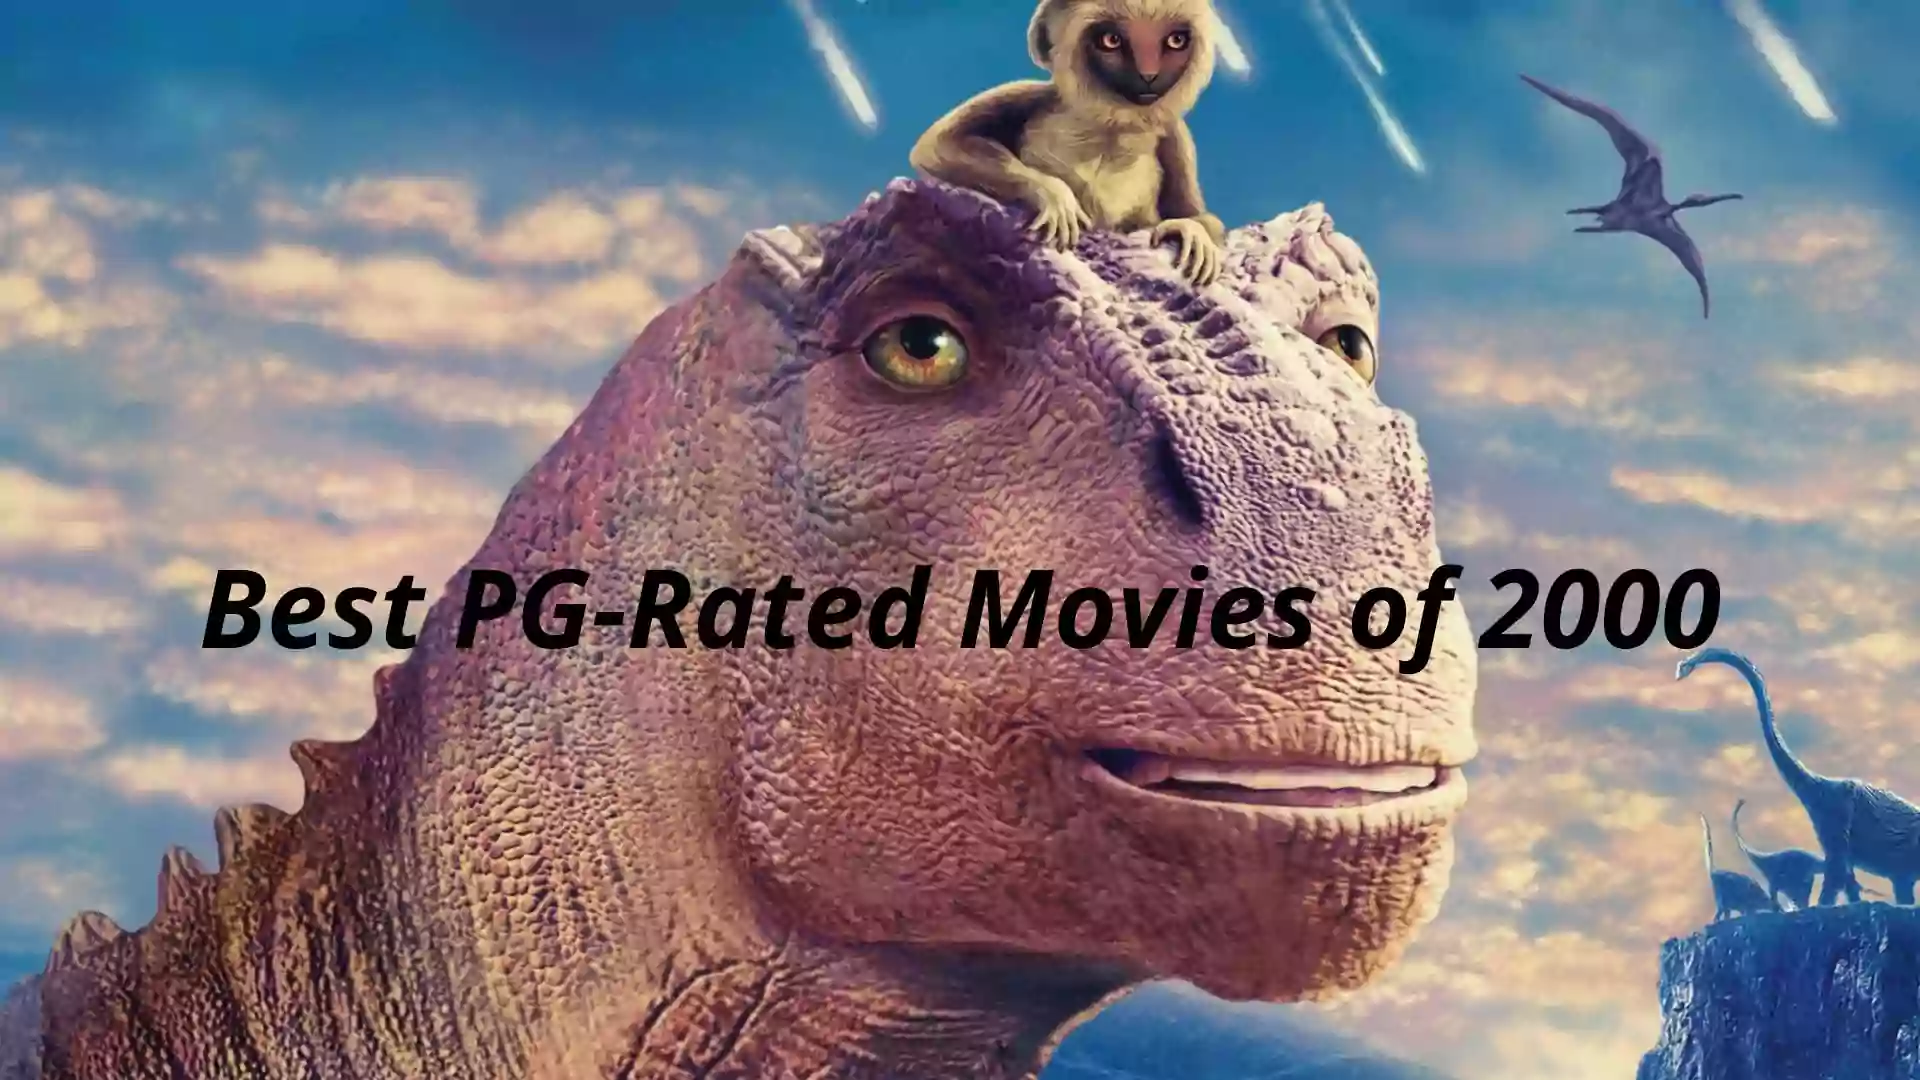 Best PG-Rated Movies of 2000